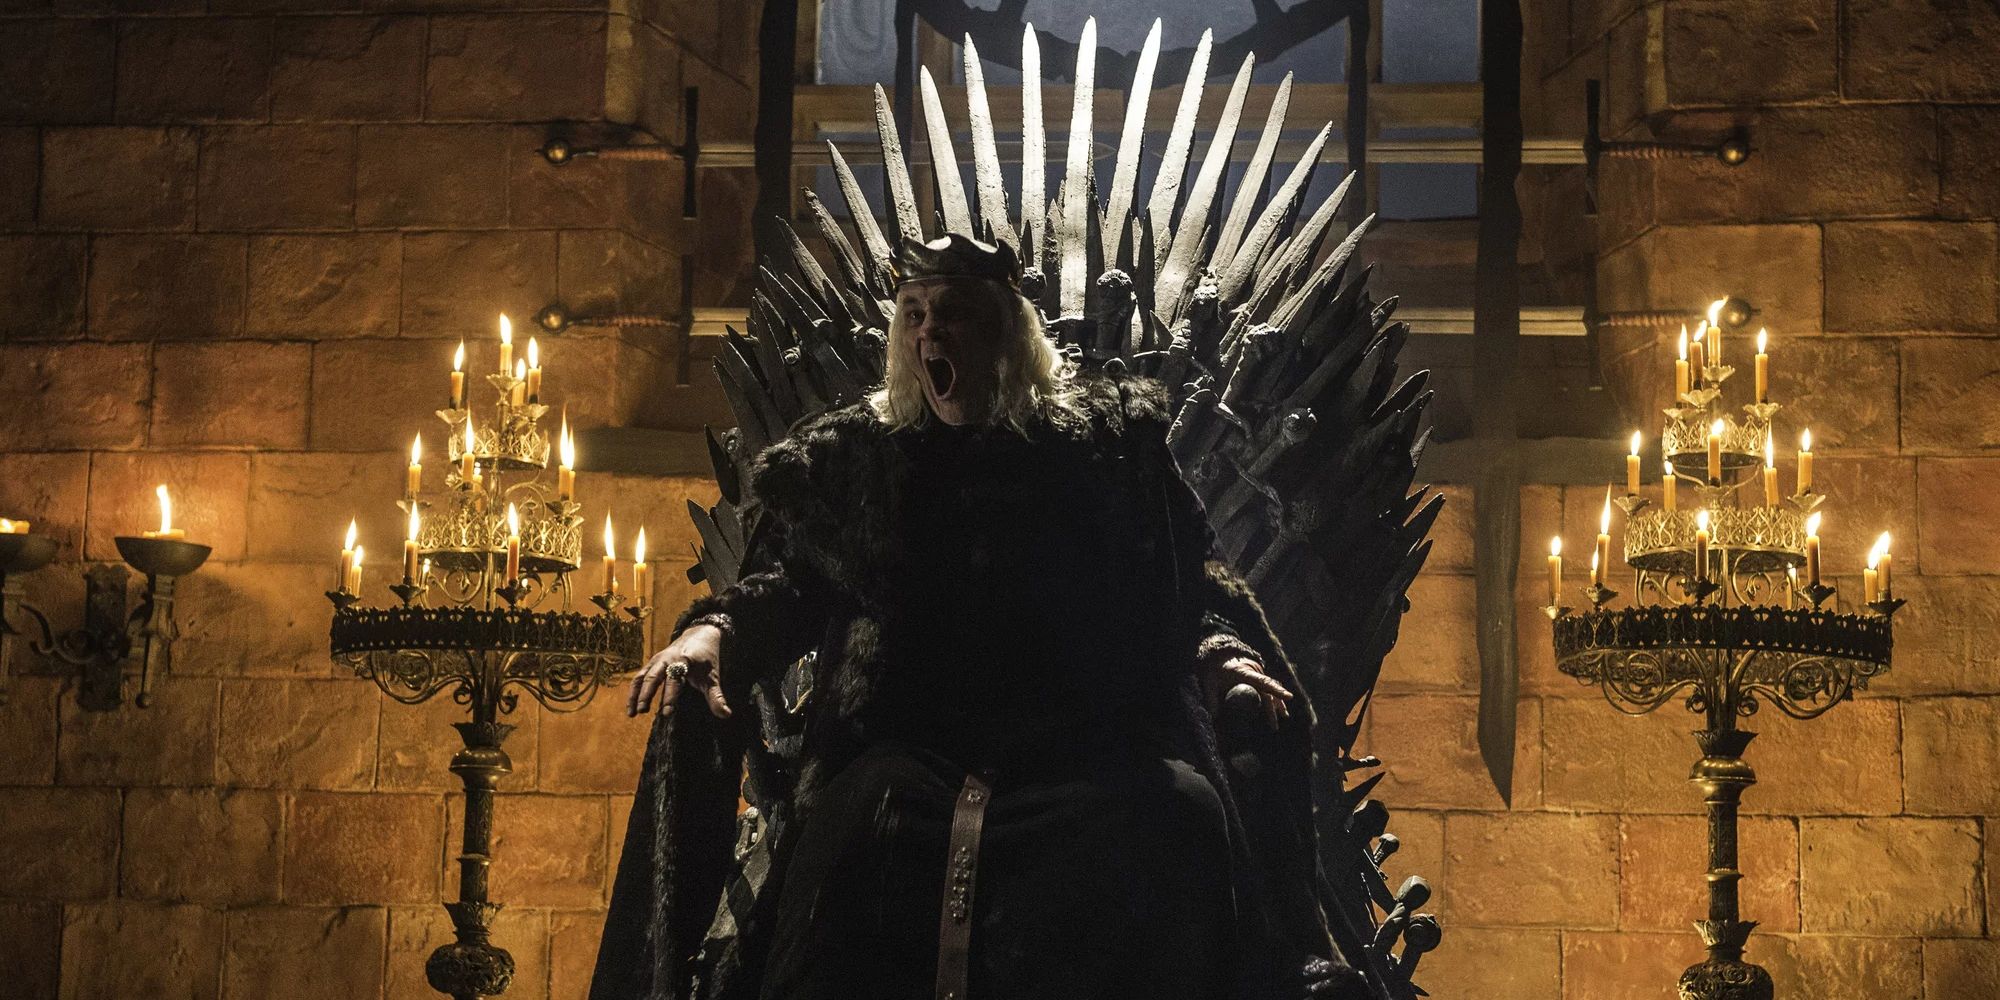 The Mad King appearing in Bran's vision in Season 6 of Game of Thrones